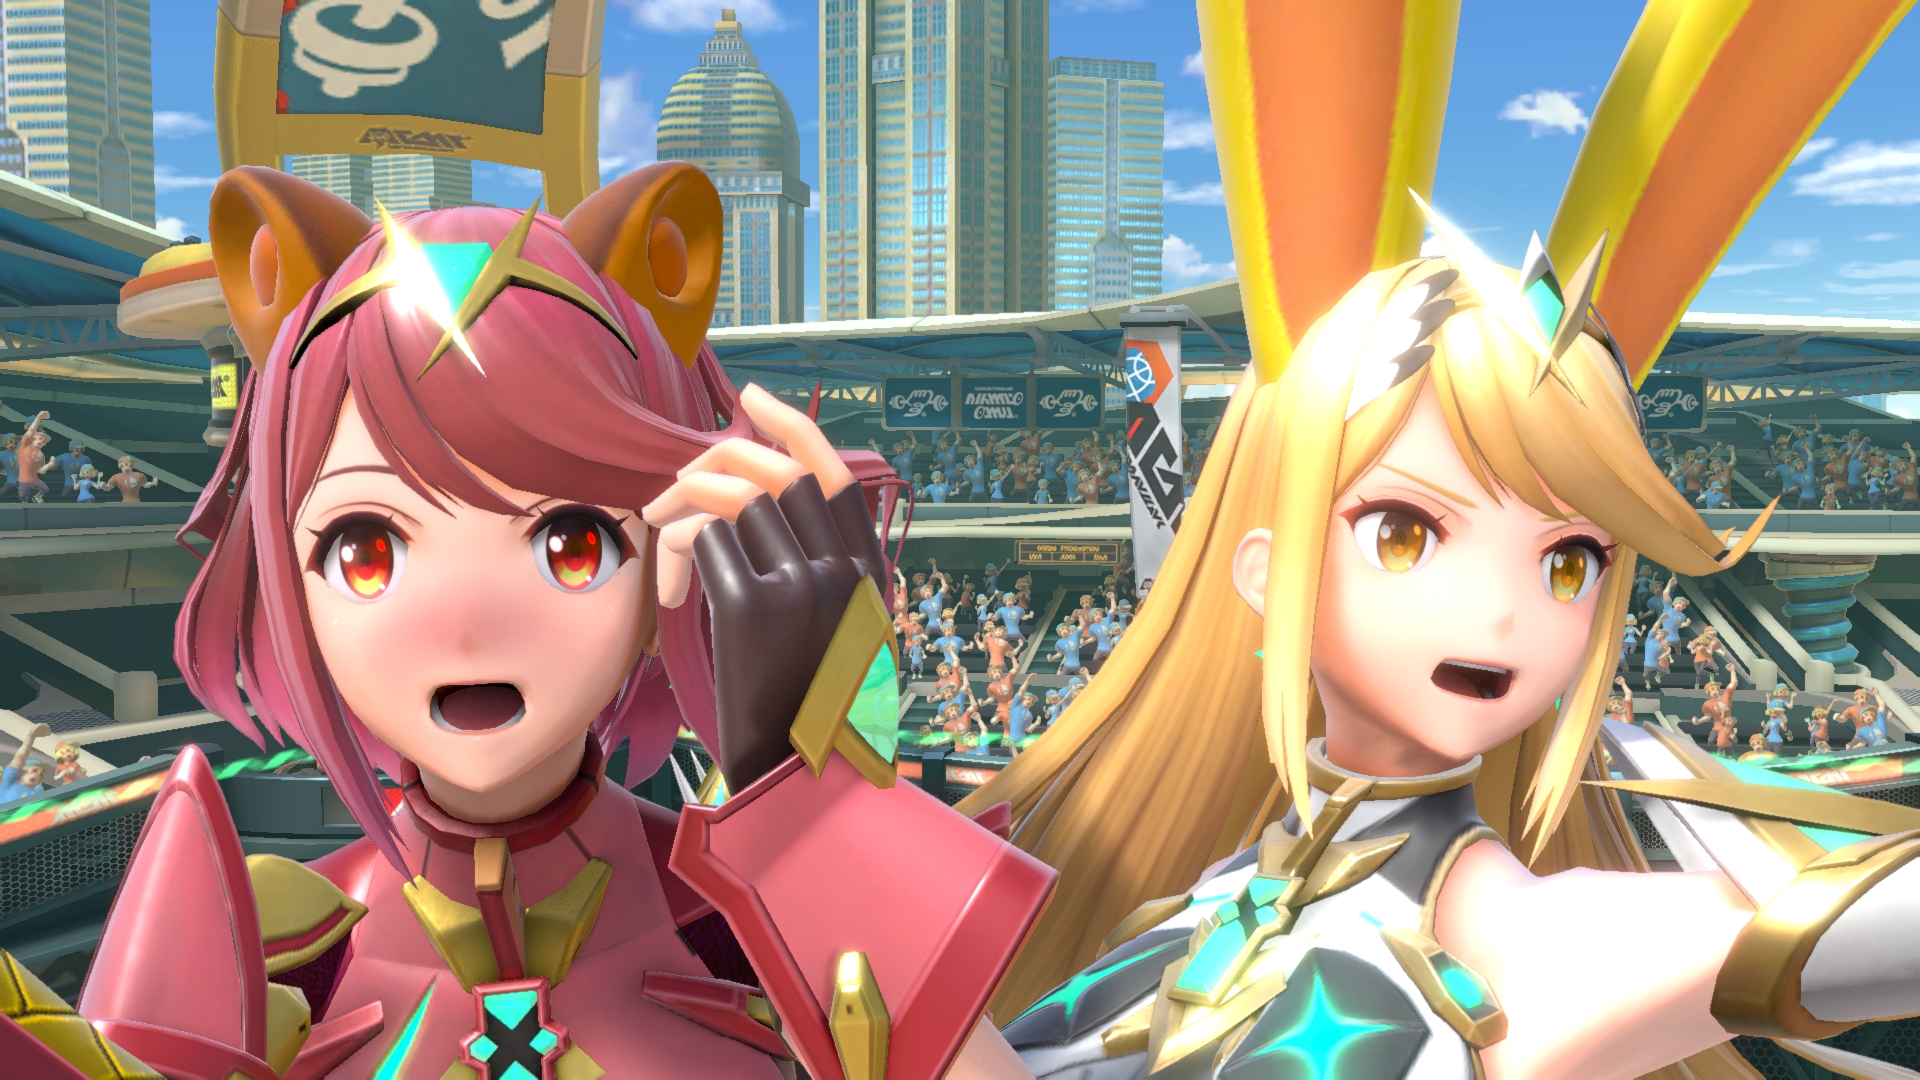 Later today, Pyra/Mythra from the Xenoblade Chronicles 2 game will official...